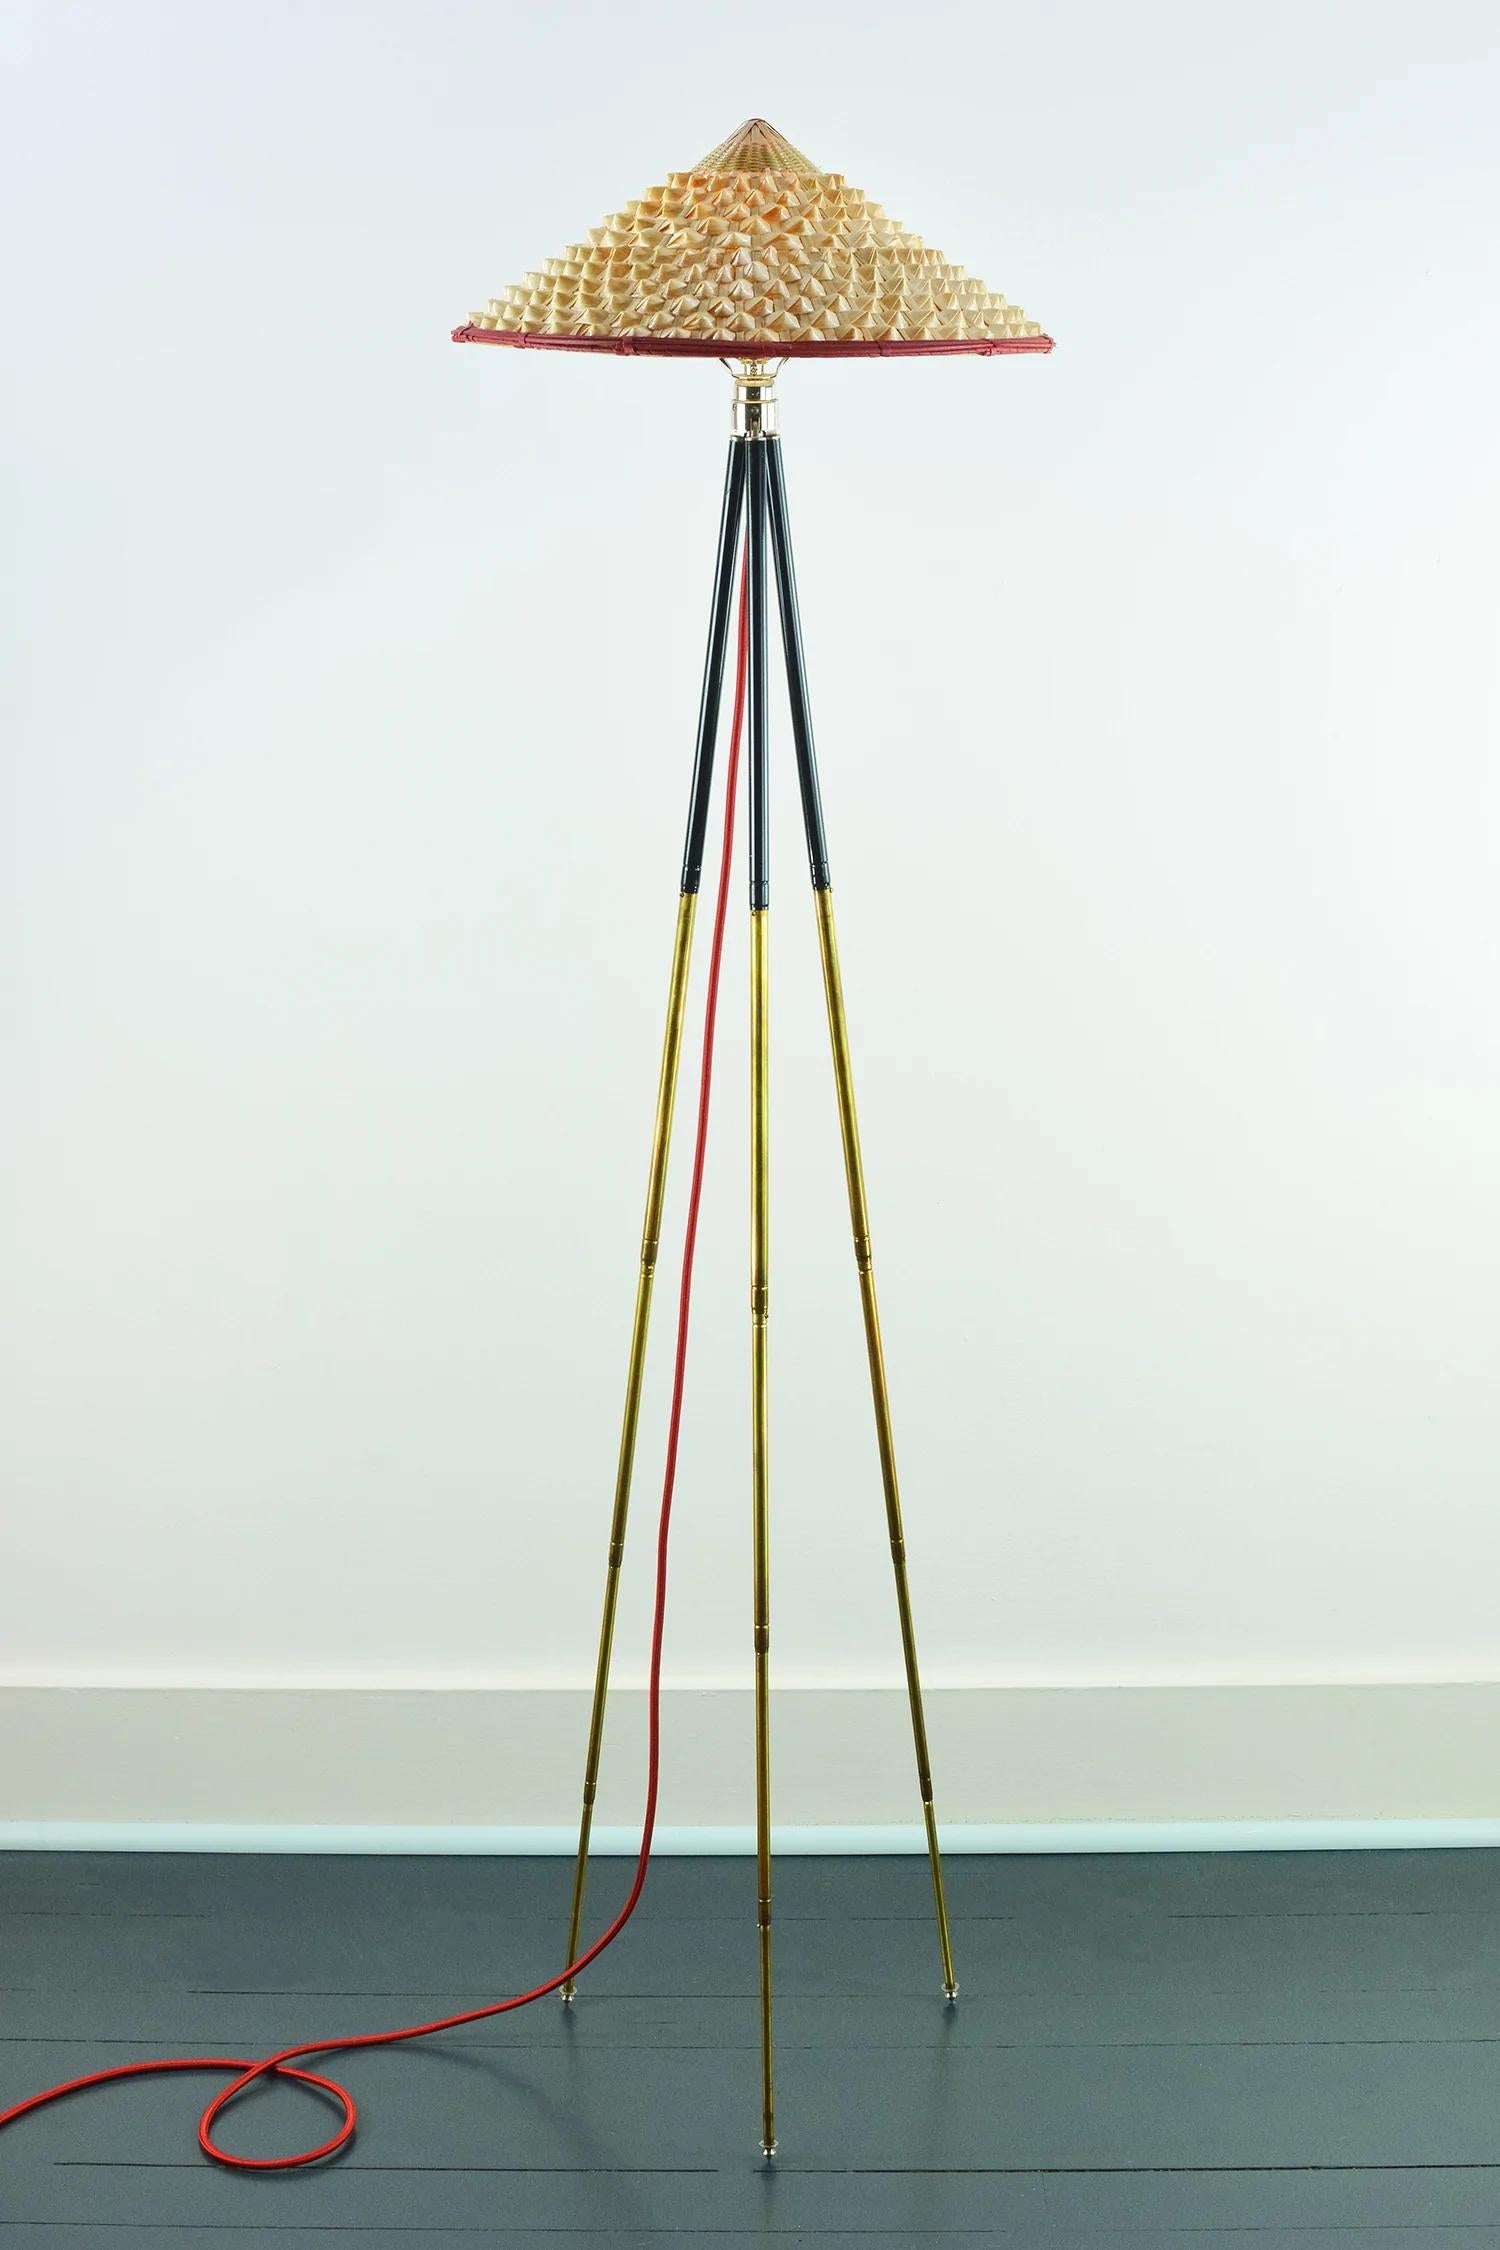 The Horst adjustable brass tripod floor lamp collection was inspired by the life and times of globe-trotting early 20th century lensman Horst P. Horst, who introduced color photography to a mass audience through his genre-defining fashion shoots for